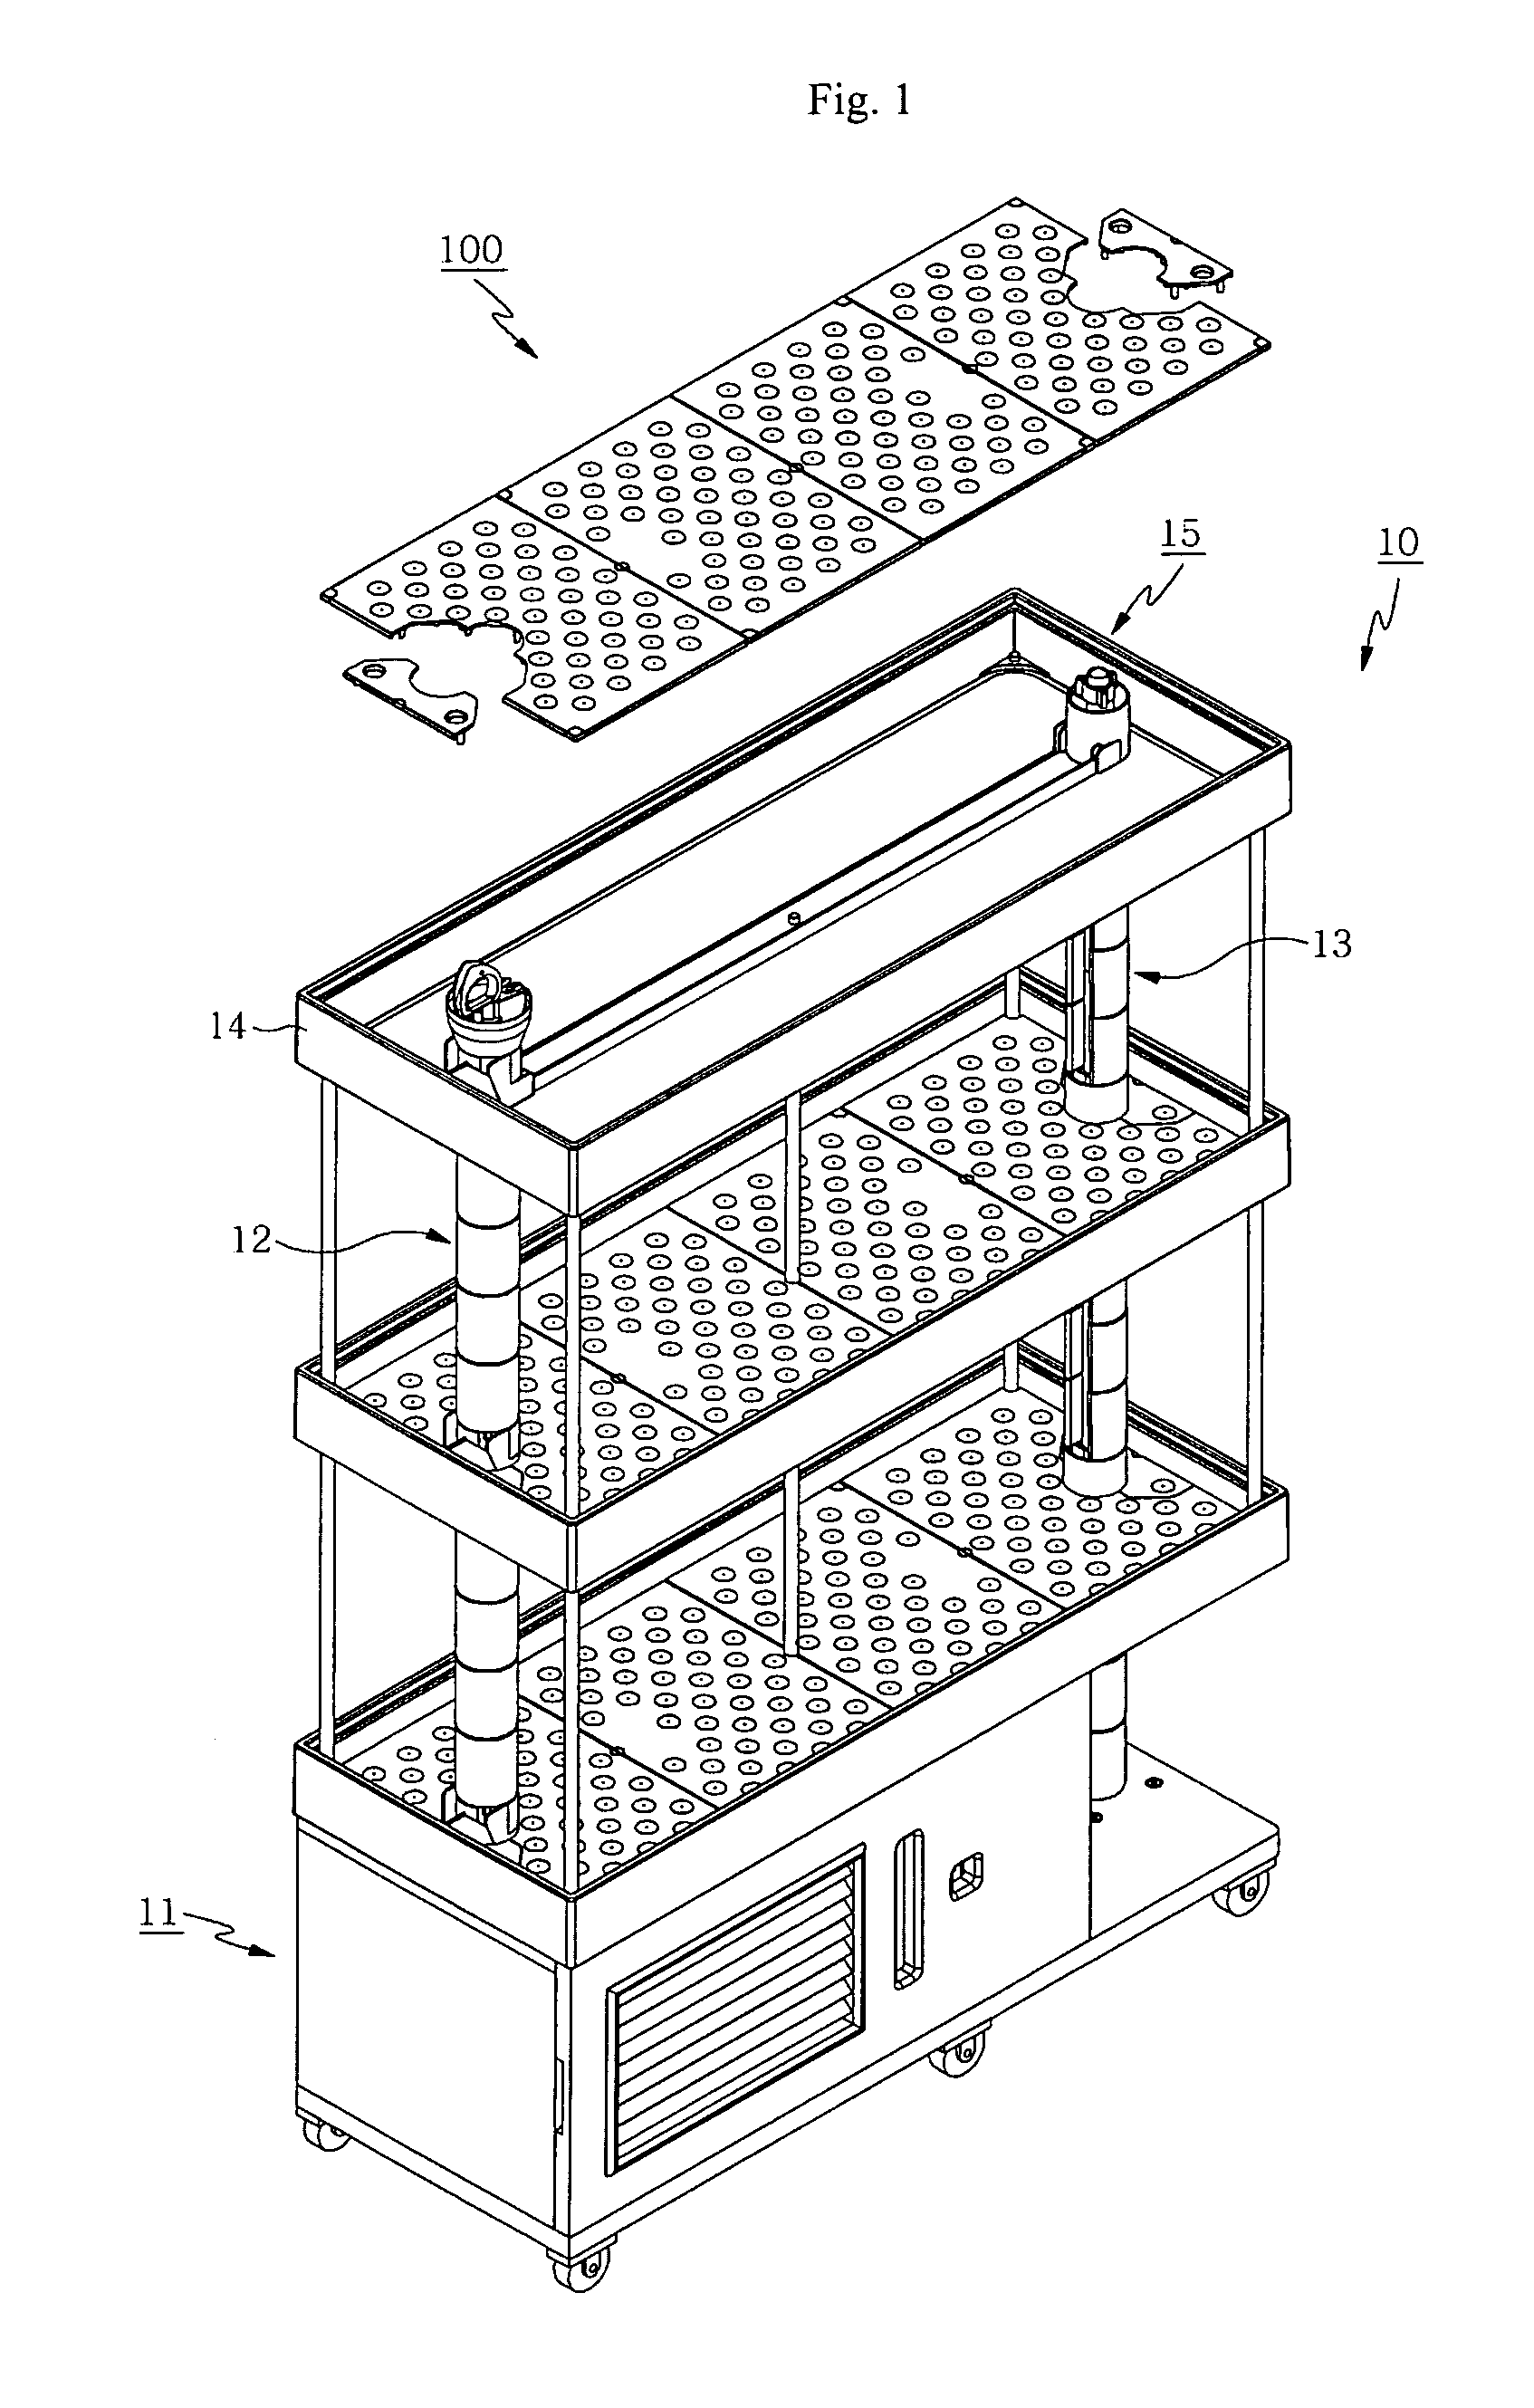 Supporting device having capability to relocate the flowerpots